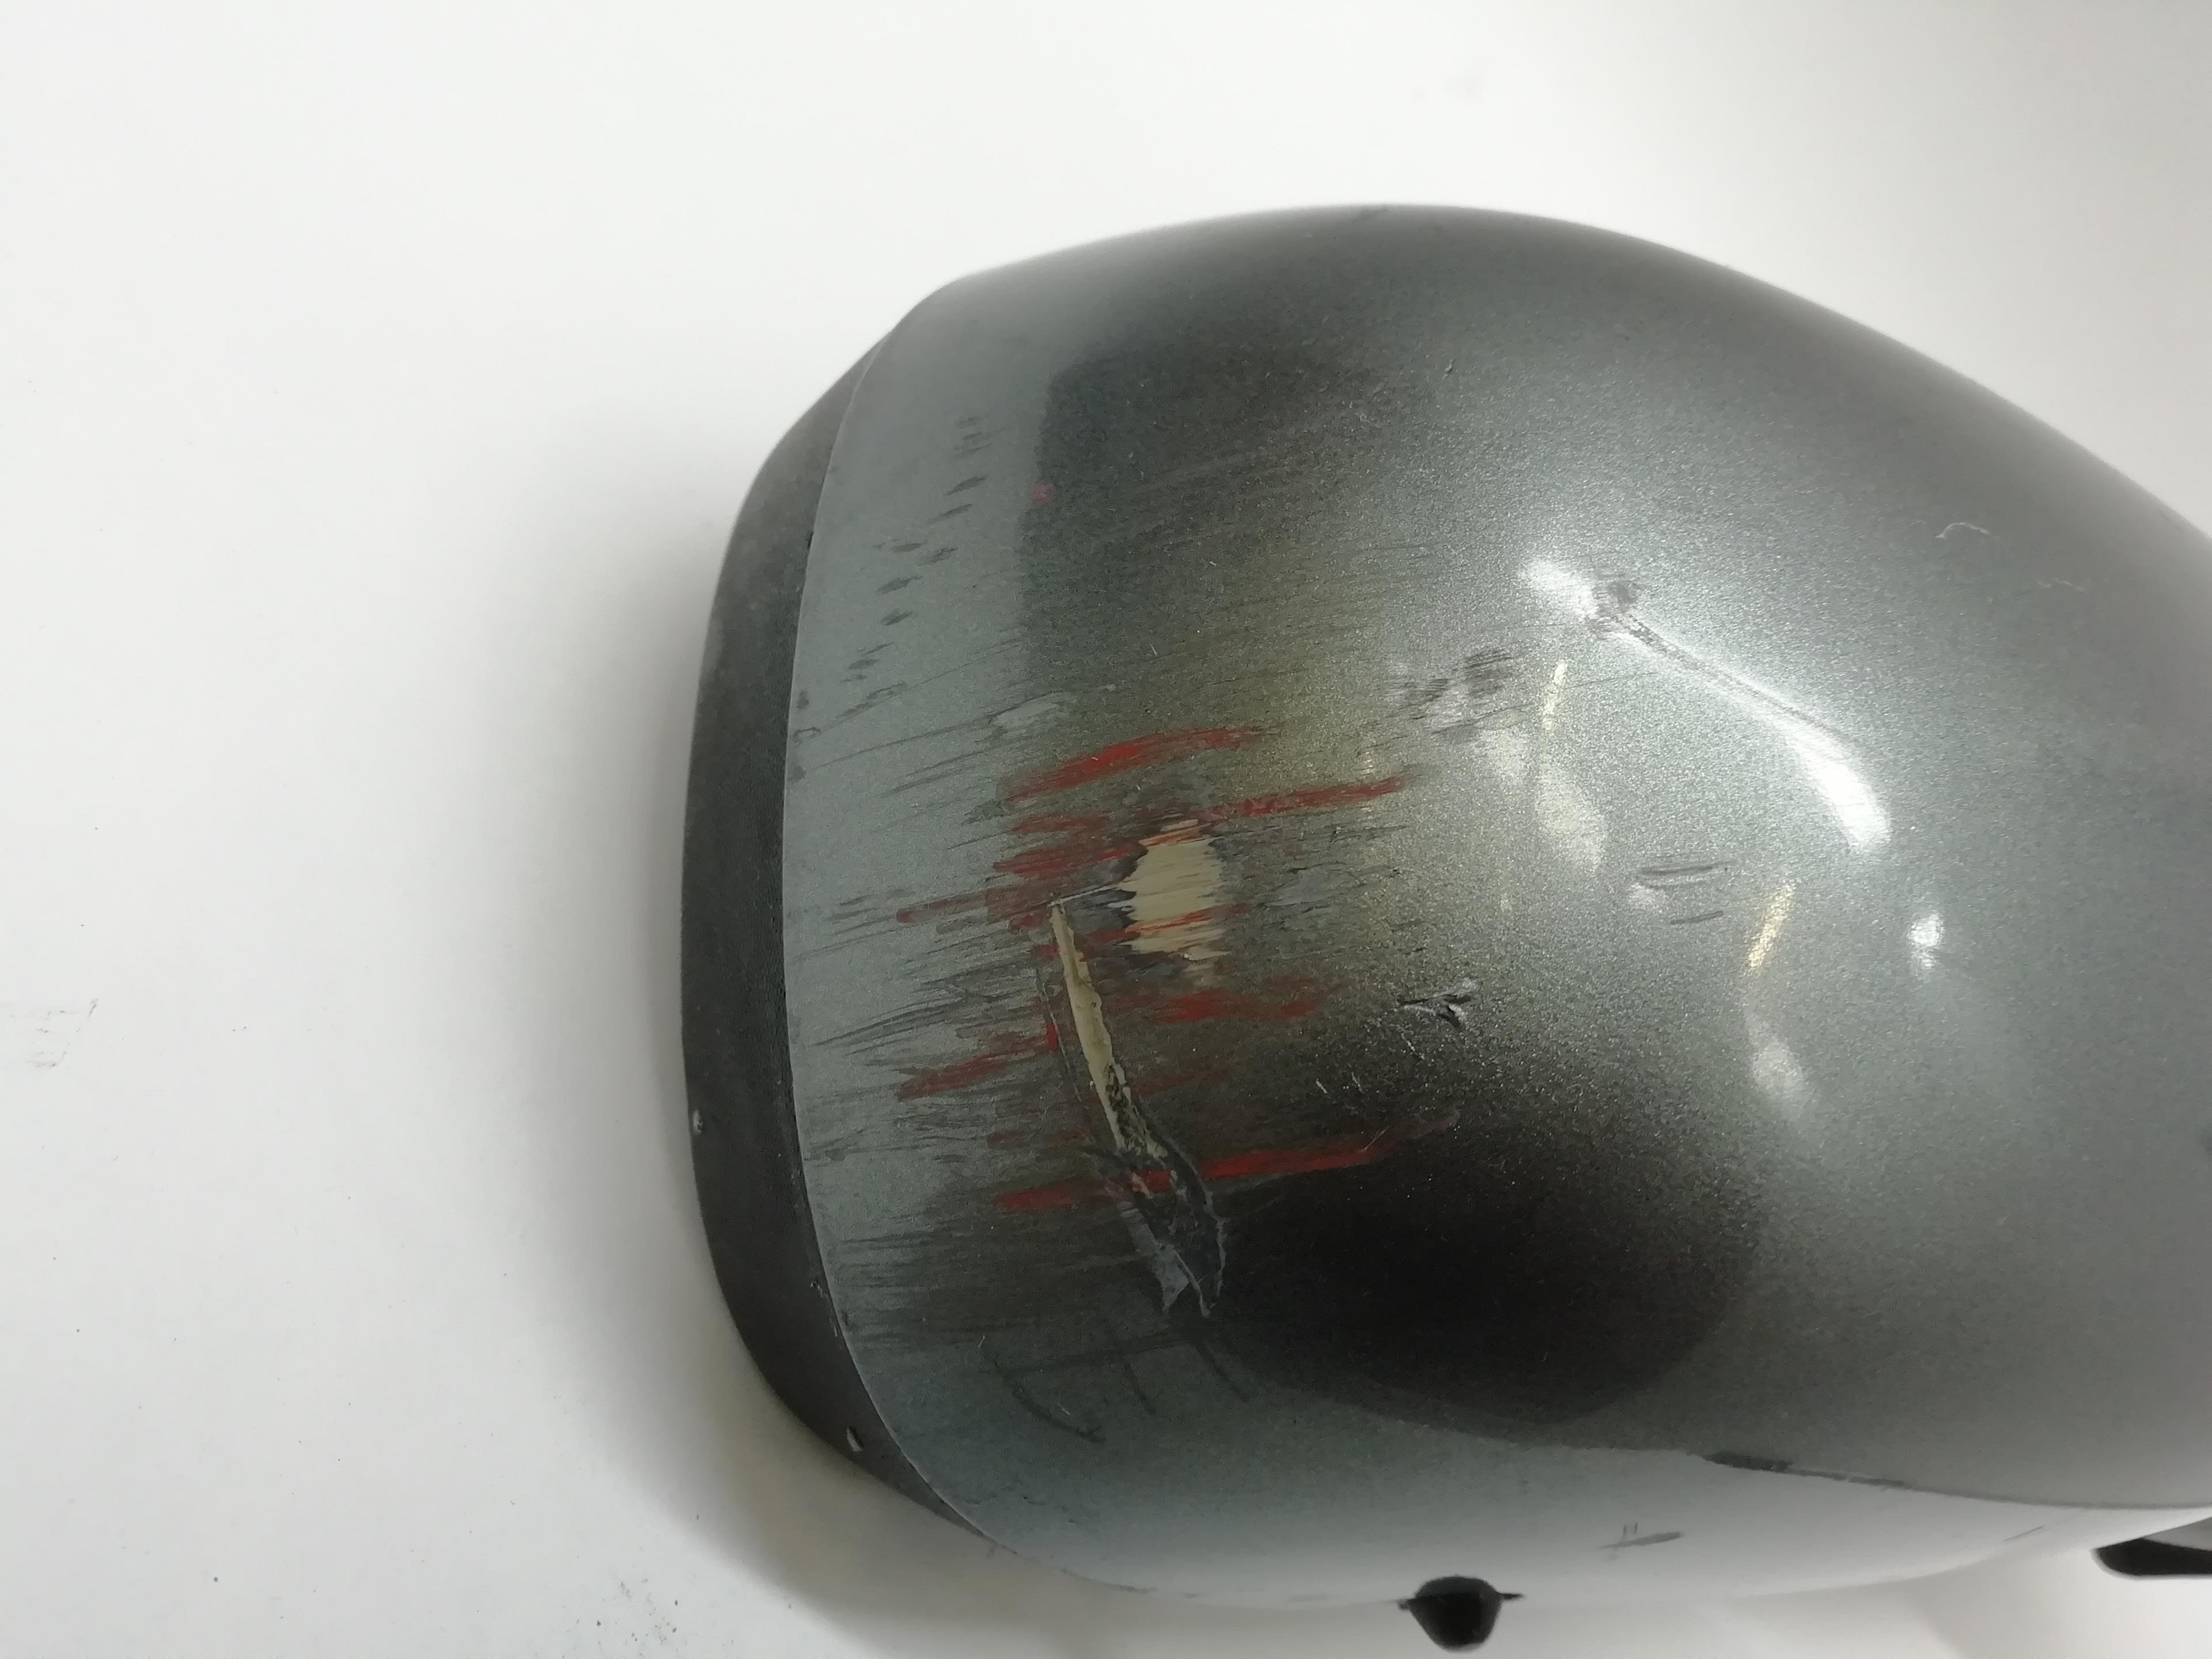 RENAULT Scenic 2 generation (2003-2010) Right Side Wing Mirror 7701055997, 12354070 24024968